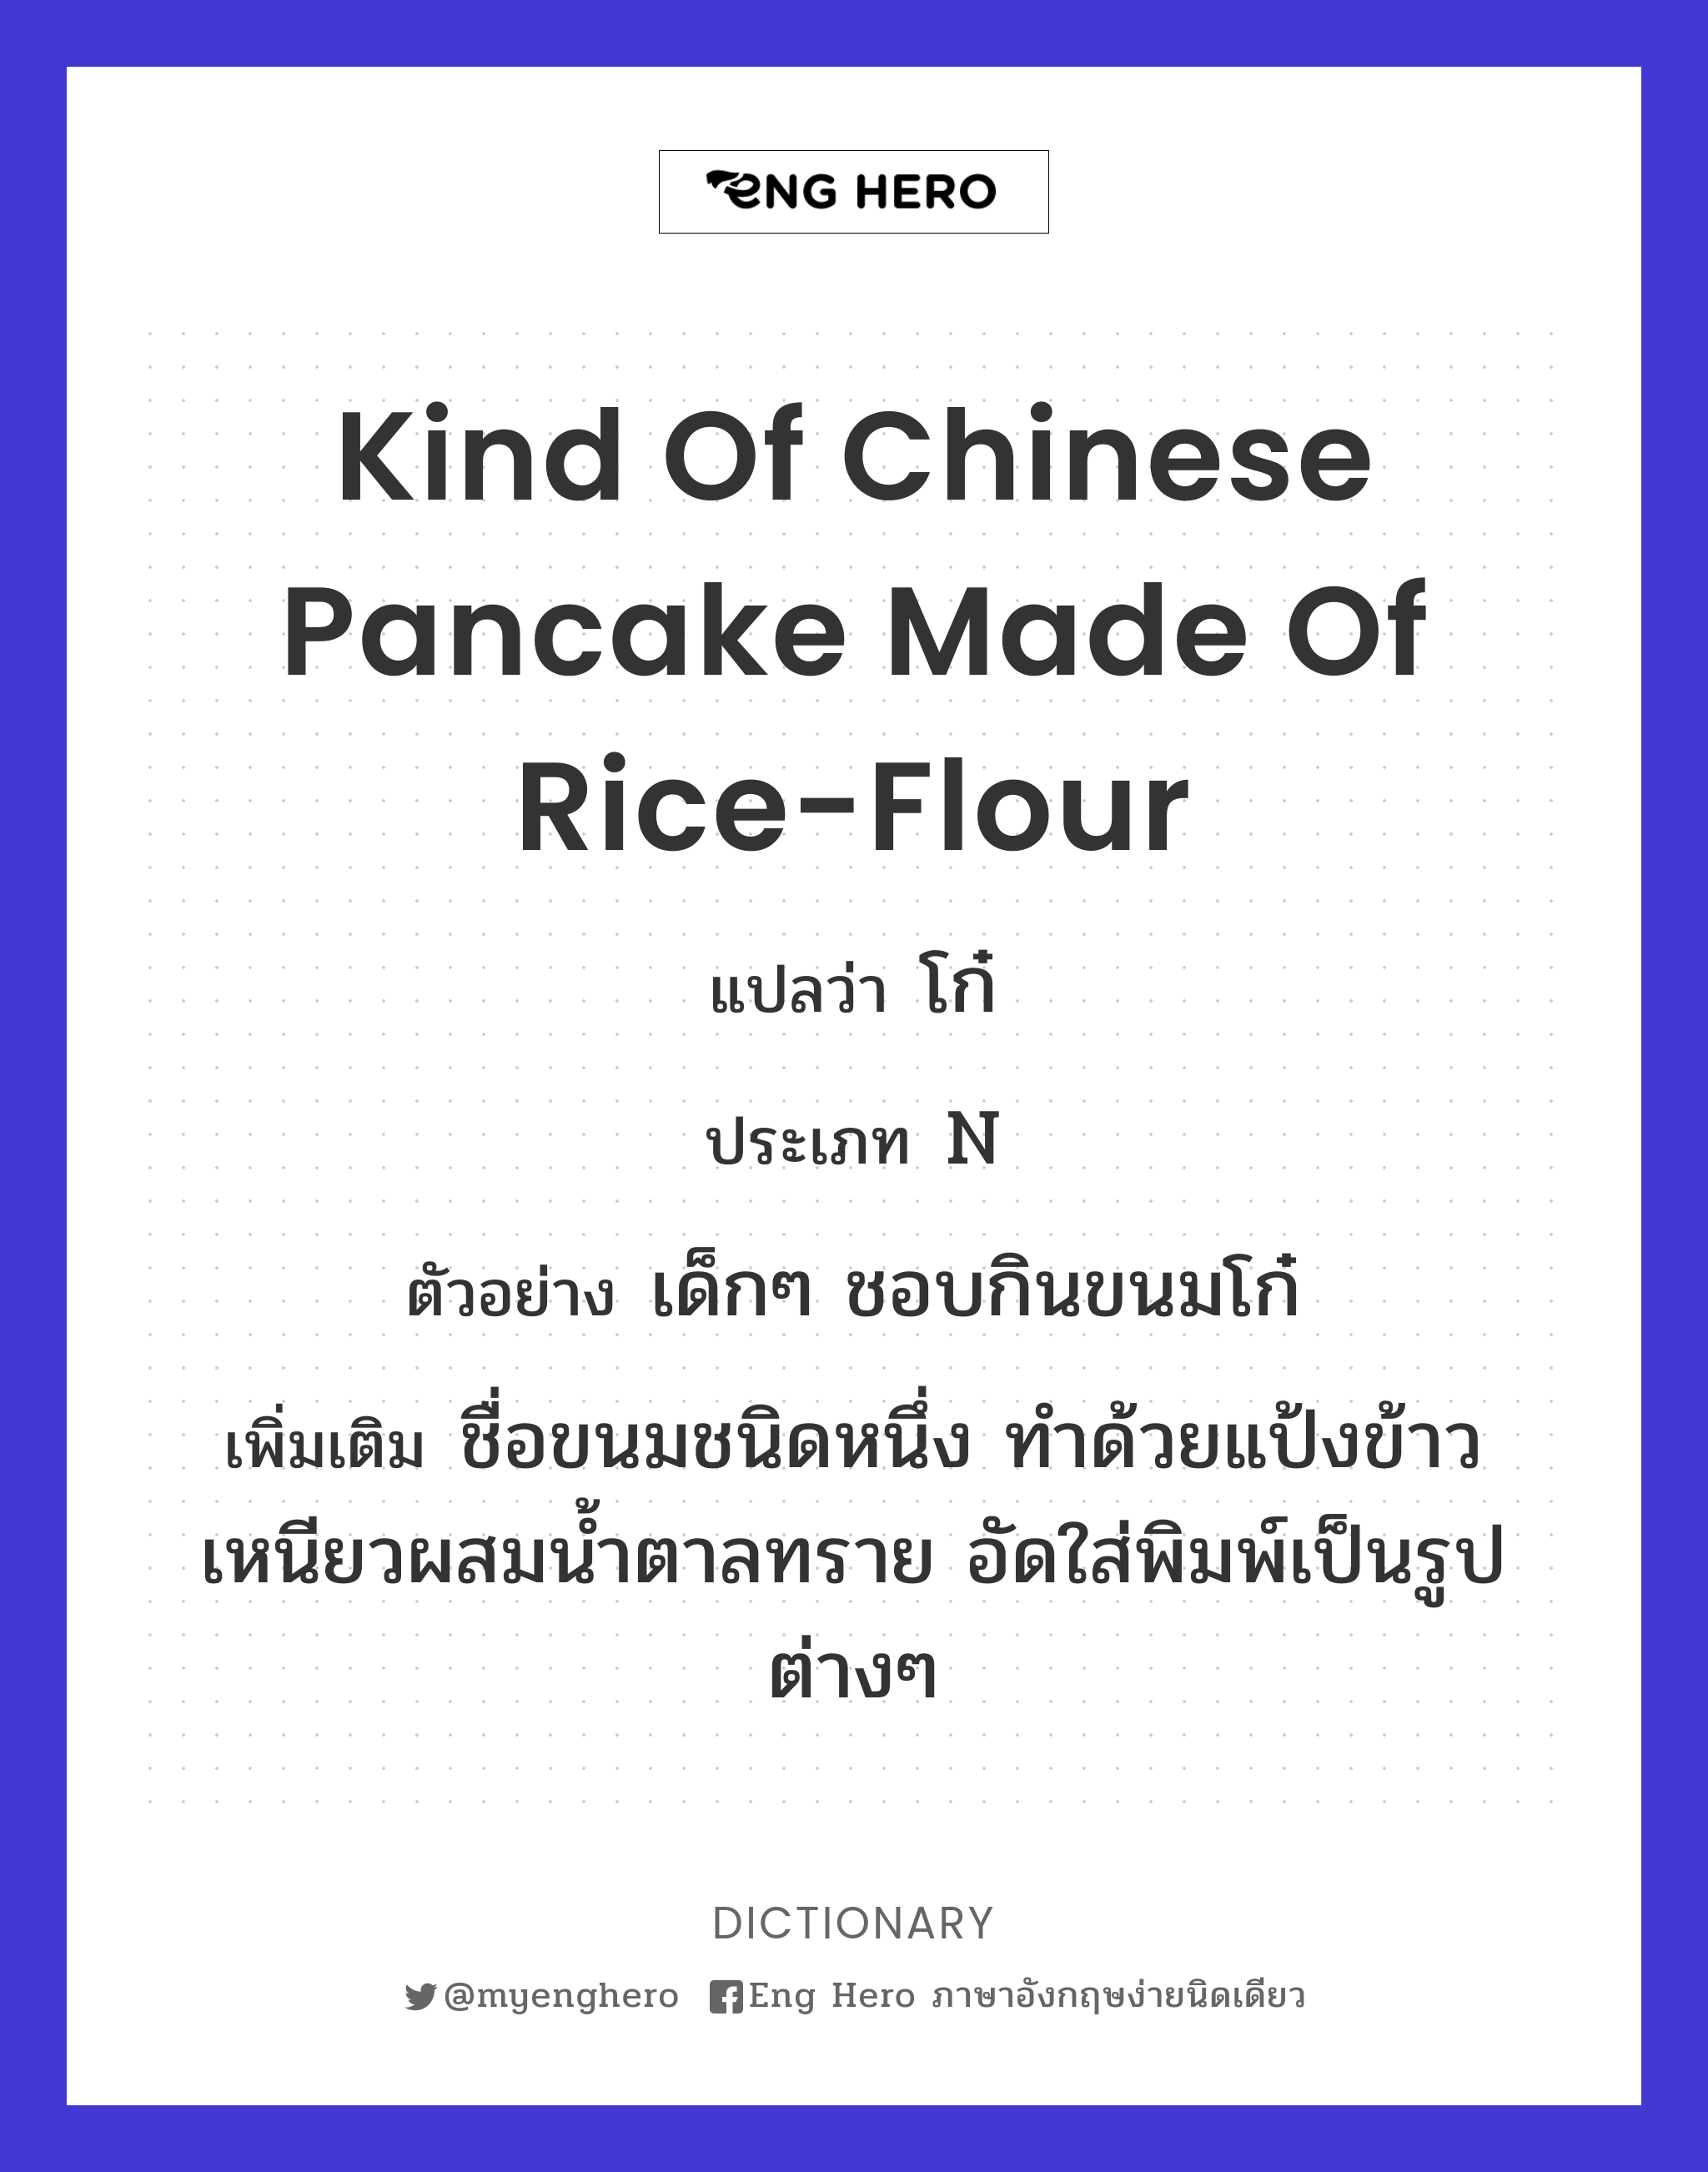 kind of Chinese pancake made of rice-flour